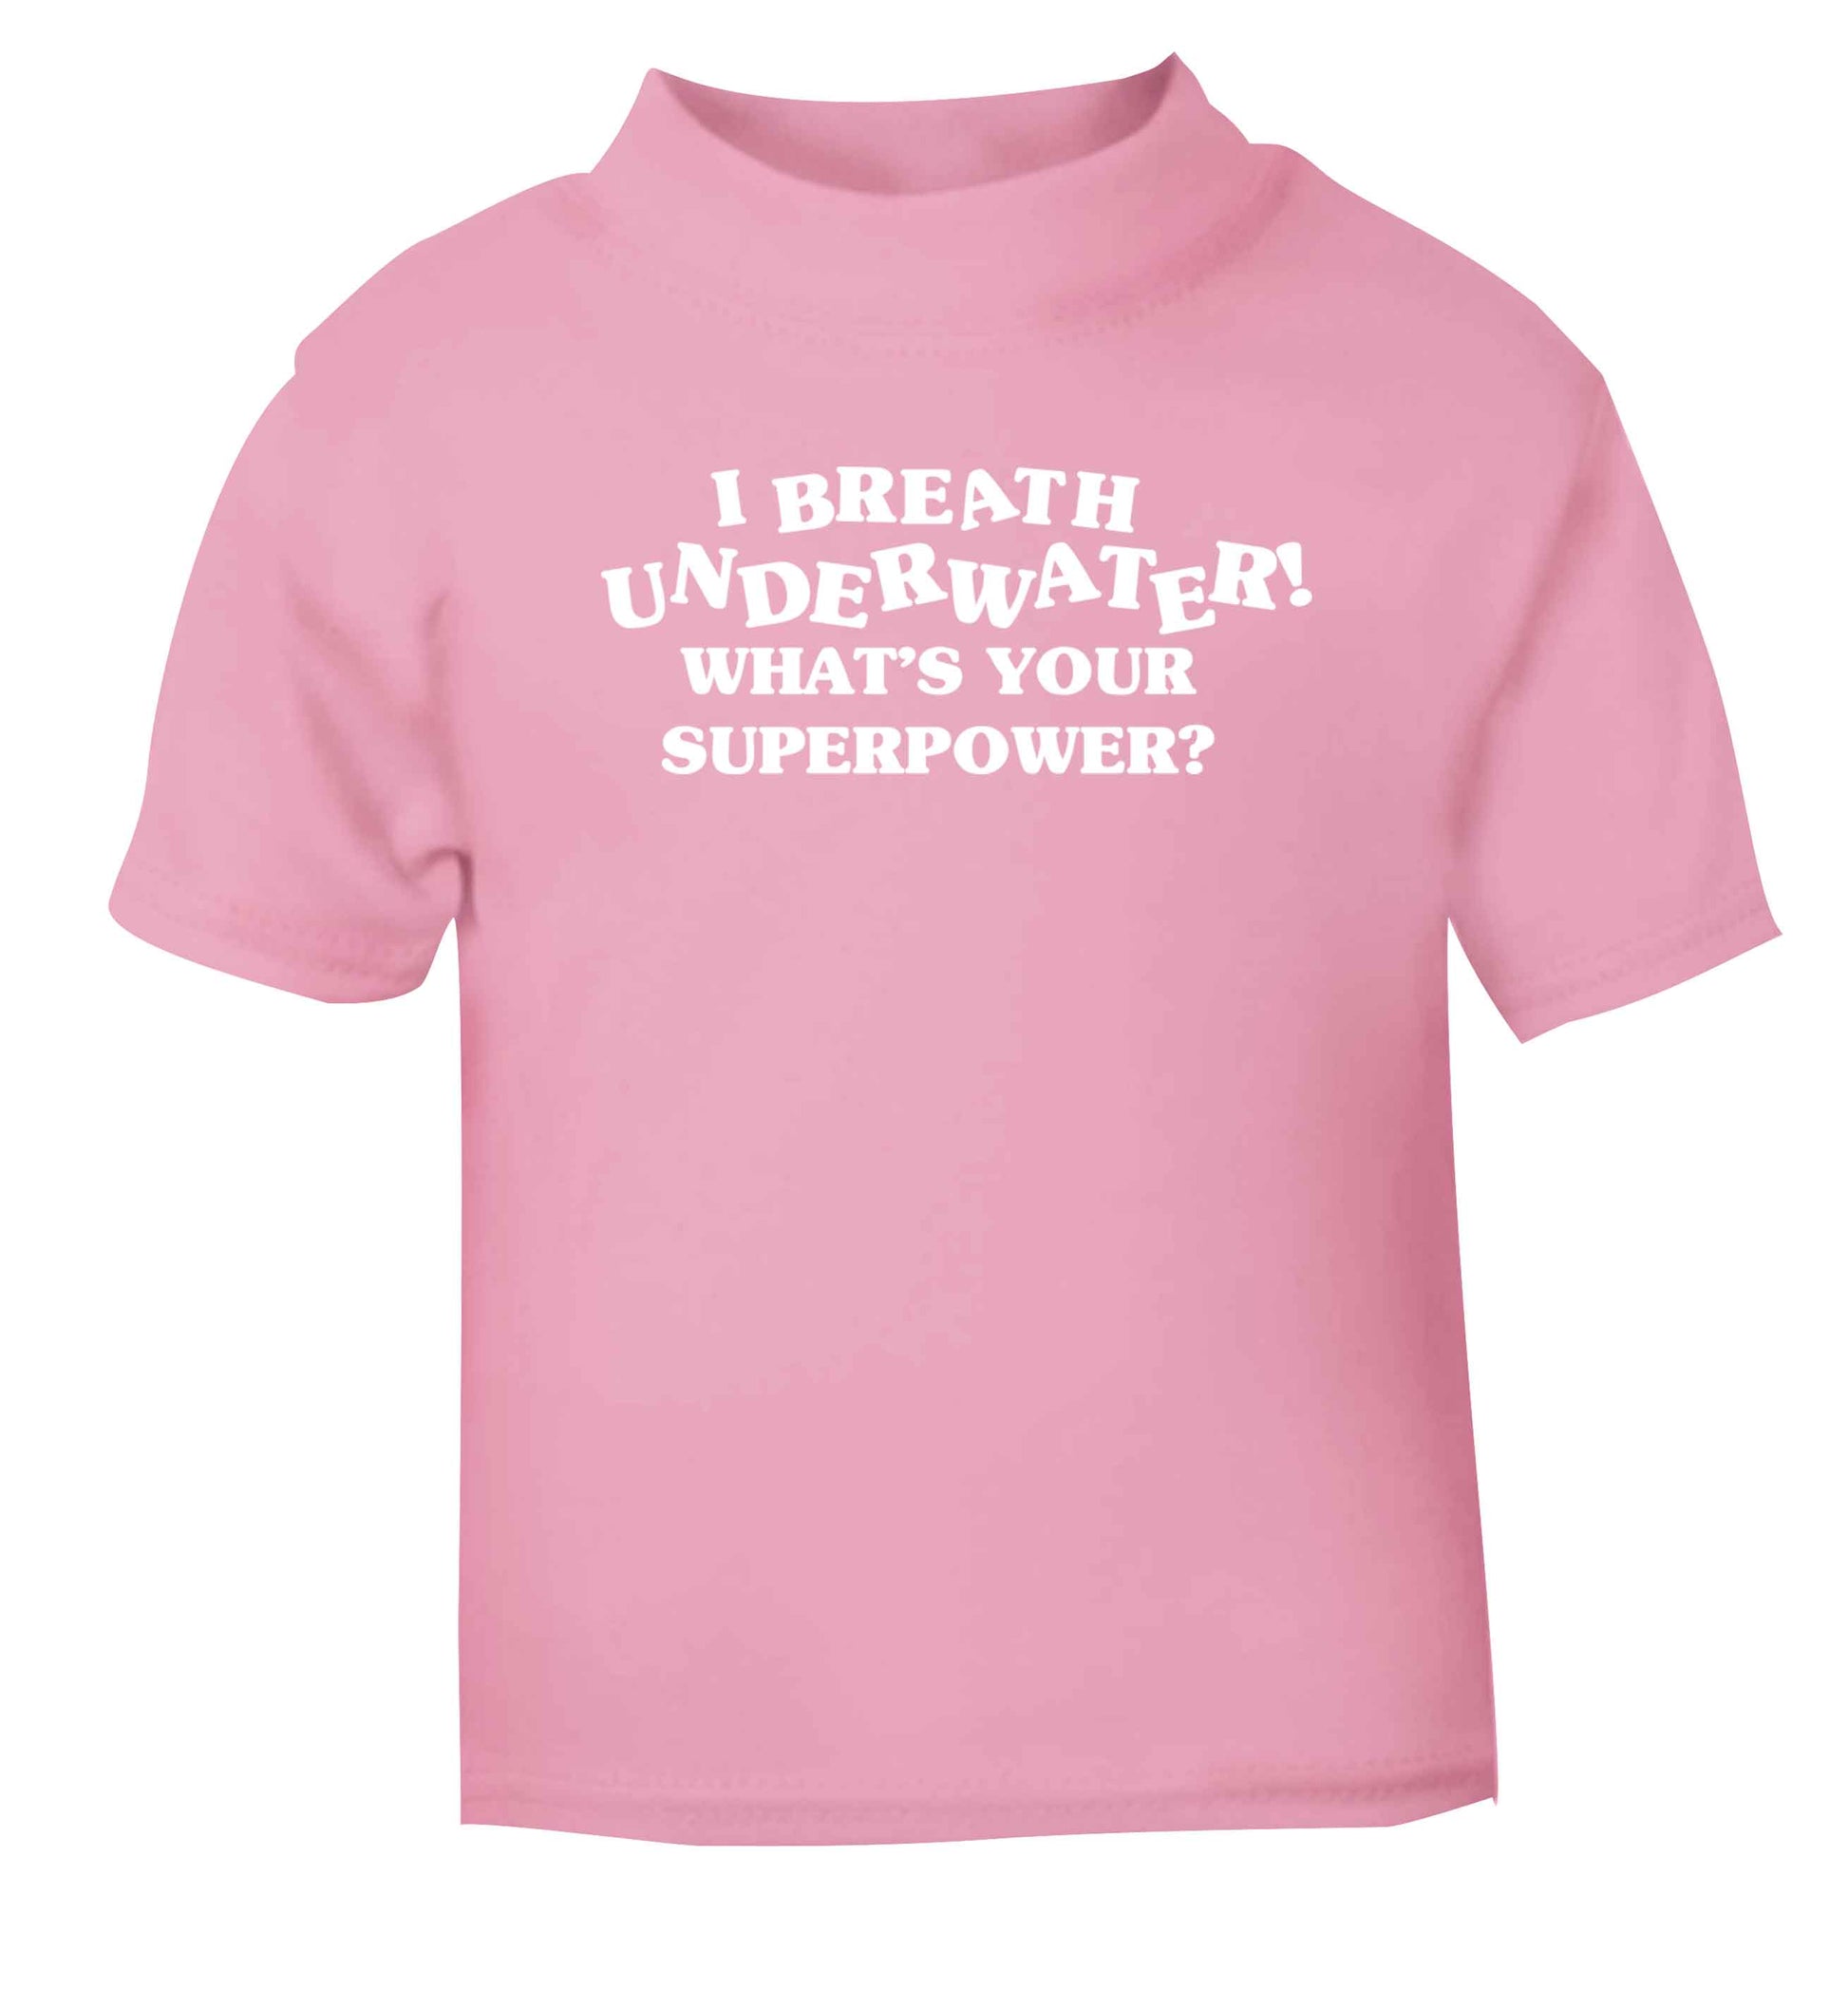 I breath underwater what's your superpower? light pink Baby Toddler Tshirt 2 Years